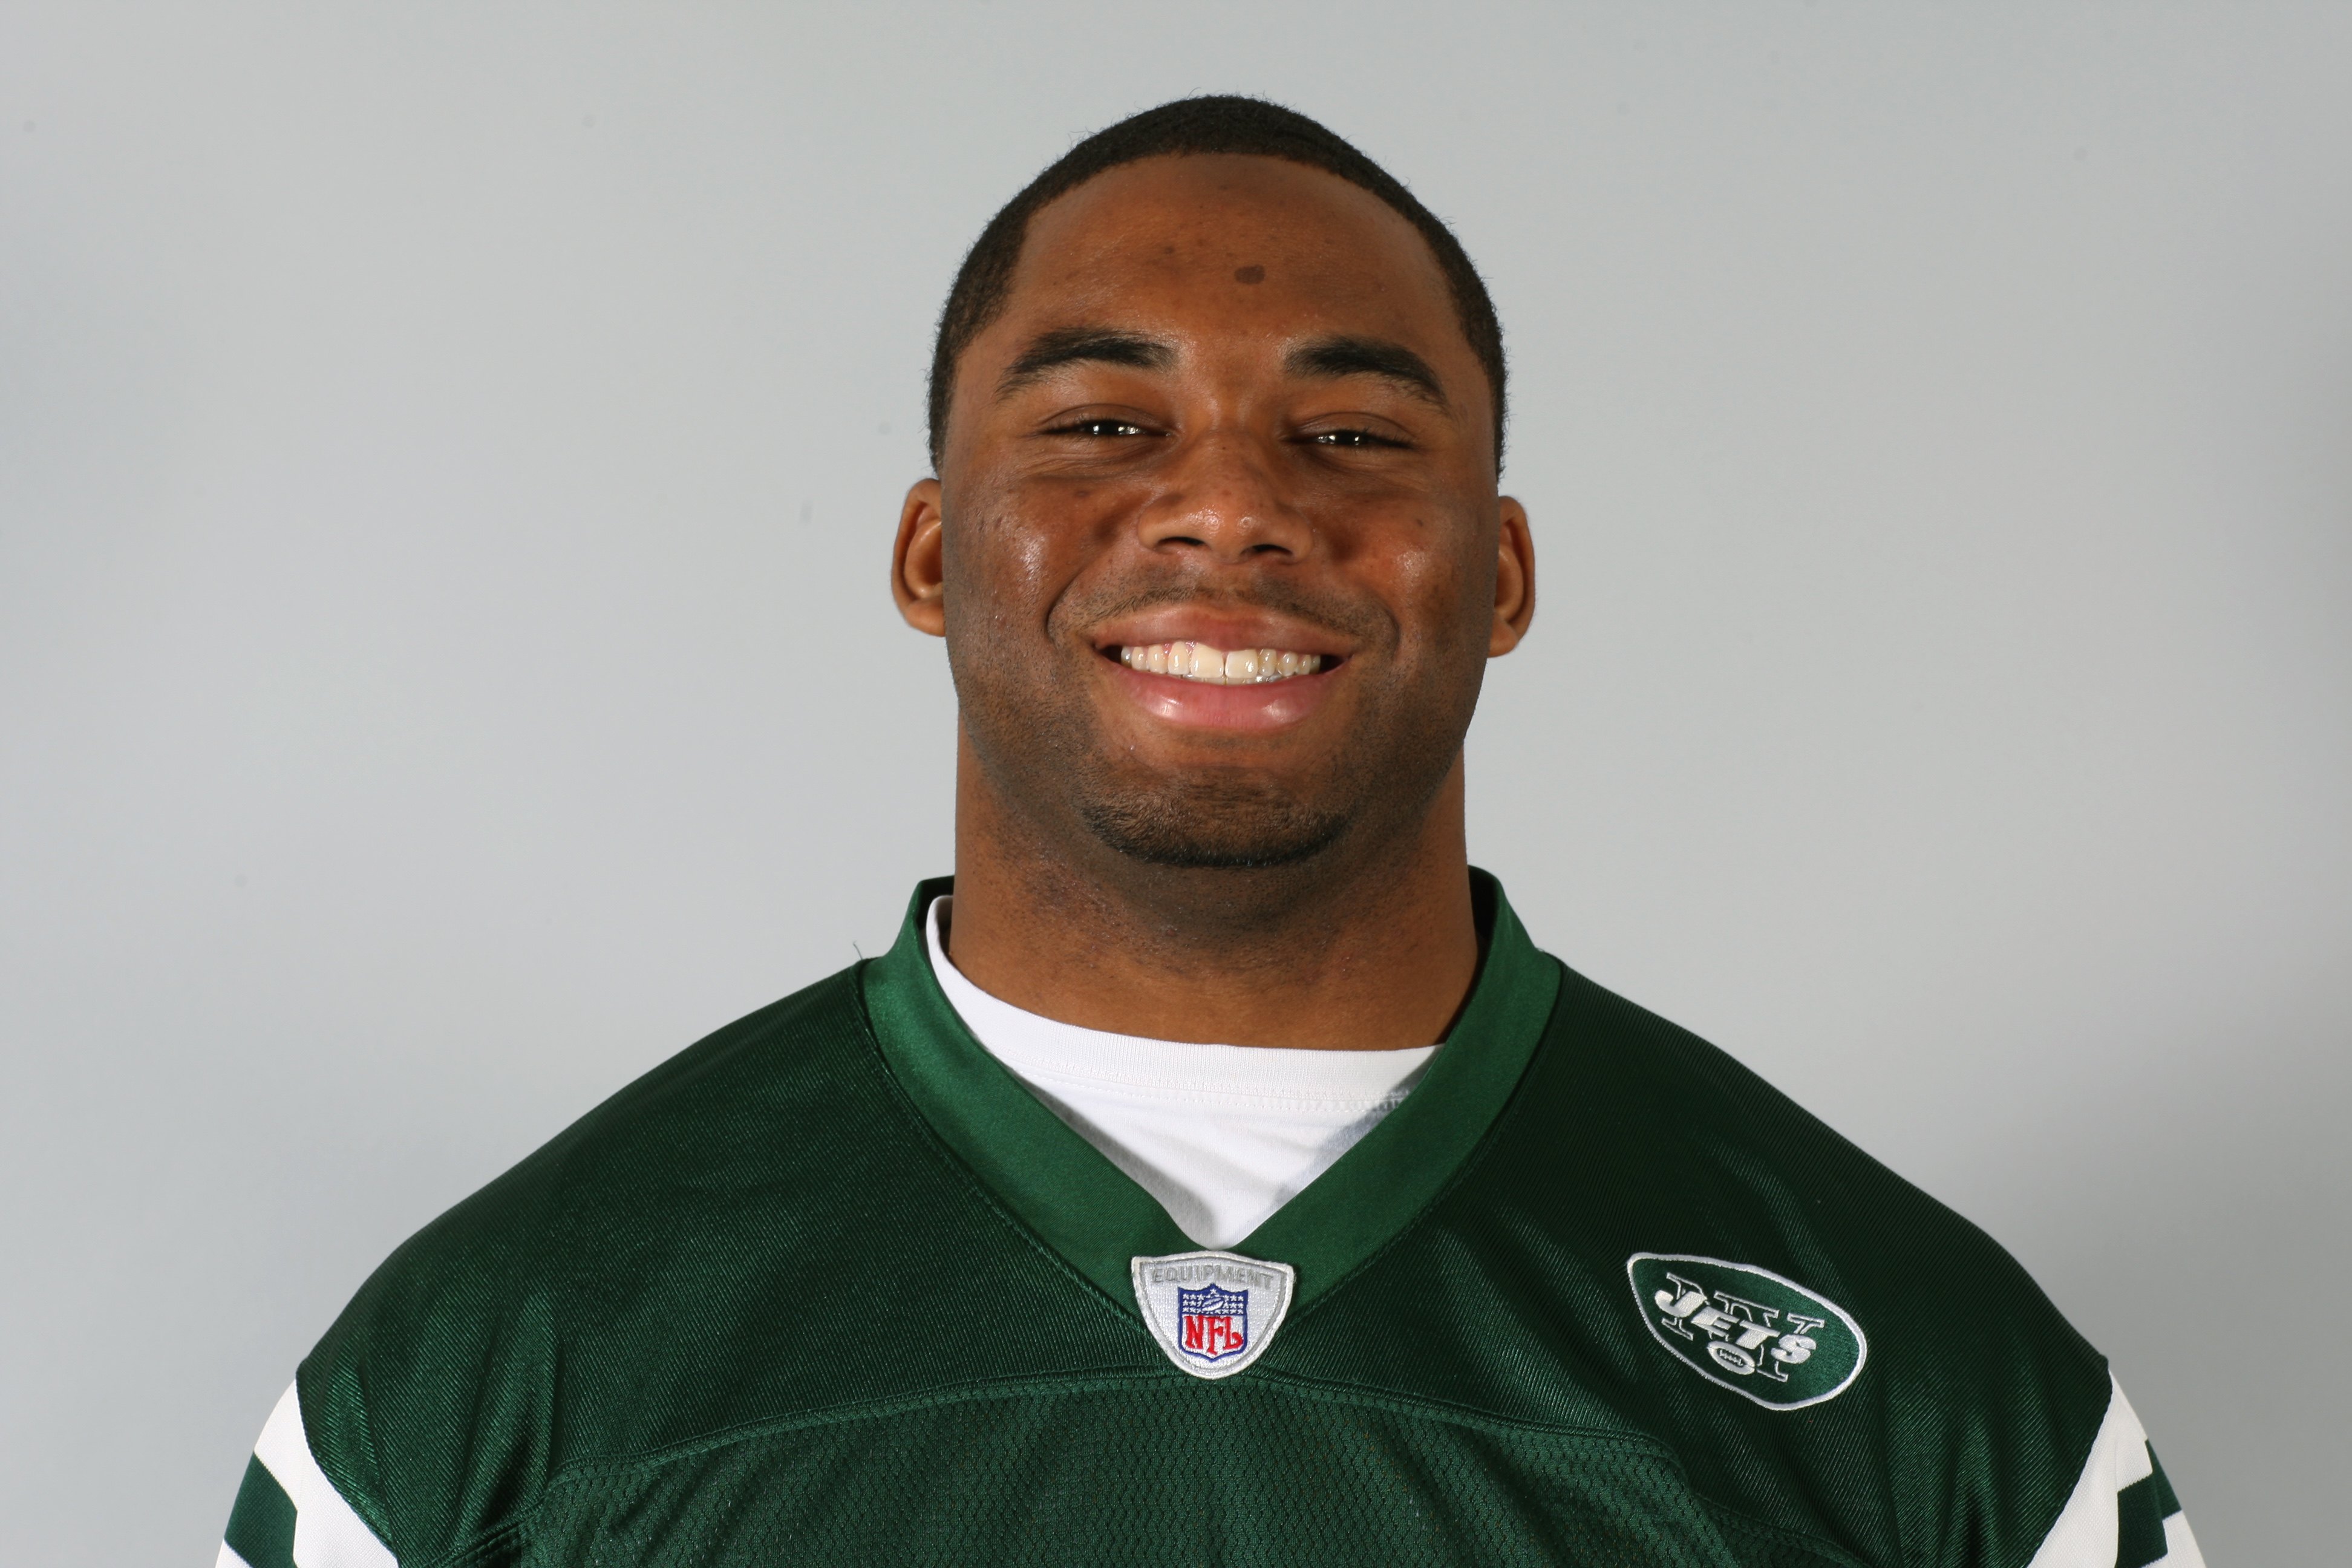 EAST RUTHERFORD, NJ - 2009:  Vernon Gholston of the New York Jets poses for his 2009 NFL headshot at photo day in East Rutherford, New Jersey.  (Photo by NFL Photos)